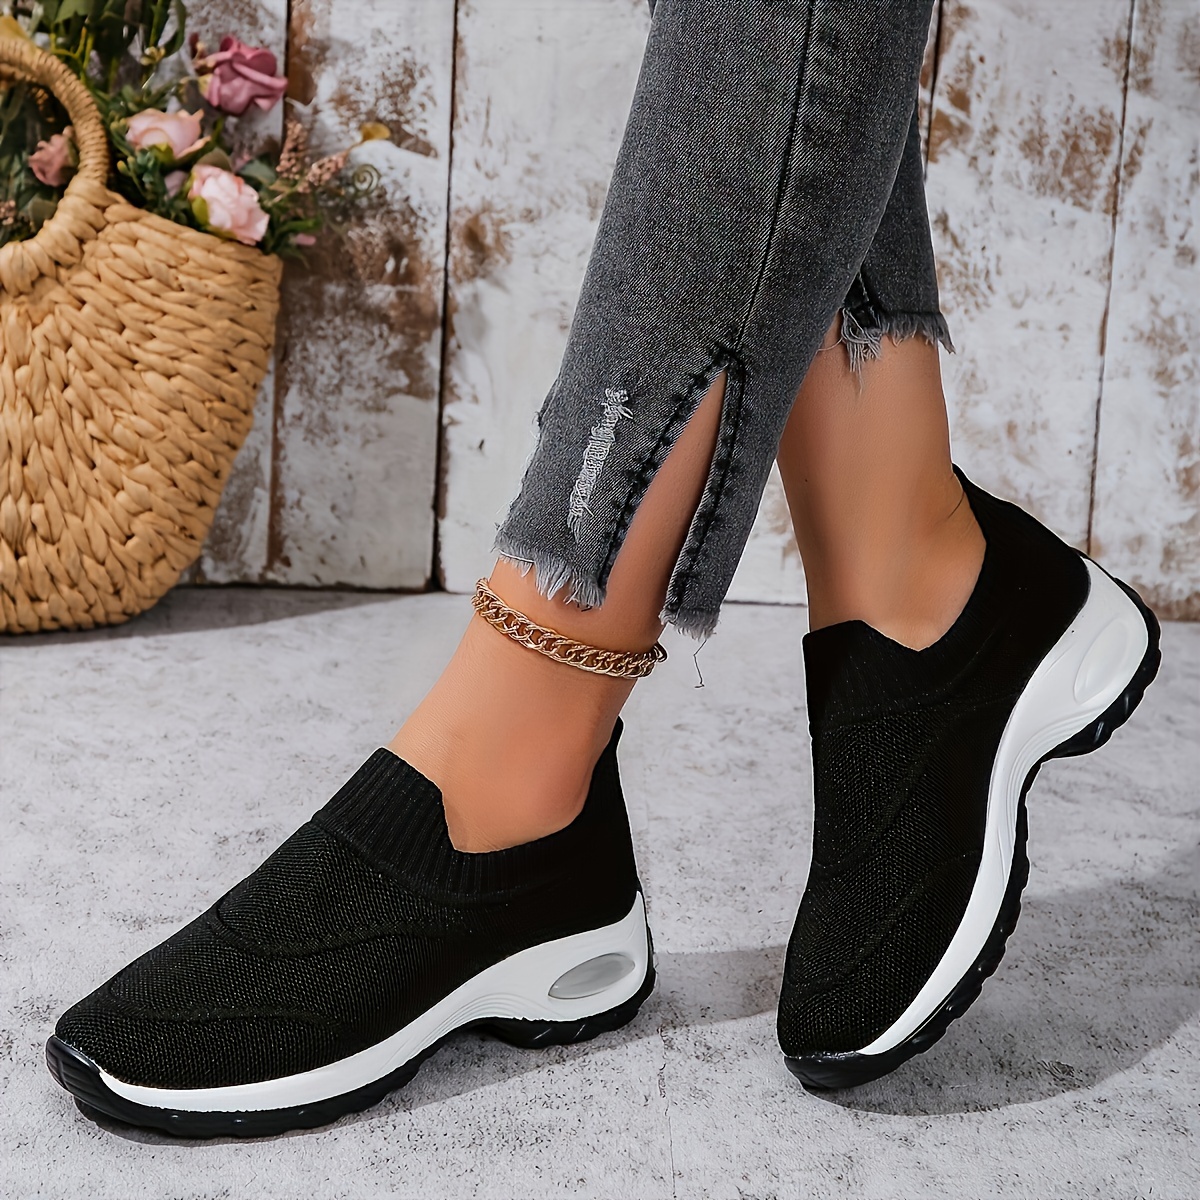 

Women's Solid Color Slip-on Sneakers, Breathable Mesh Athletic Shoes With Cushioned Sole, Casual Sporty Shoes For Walking